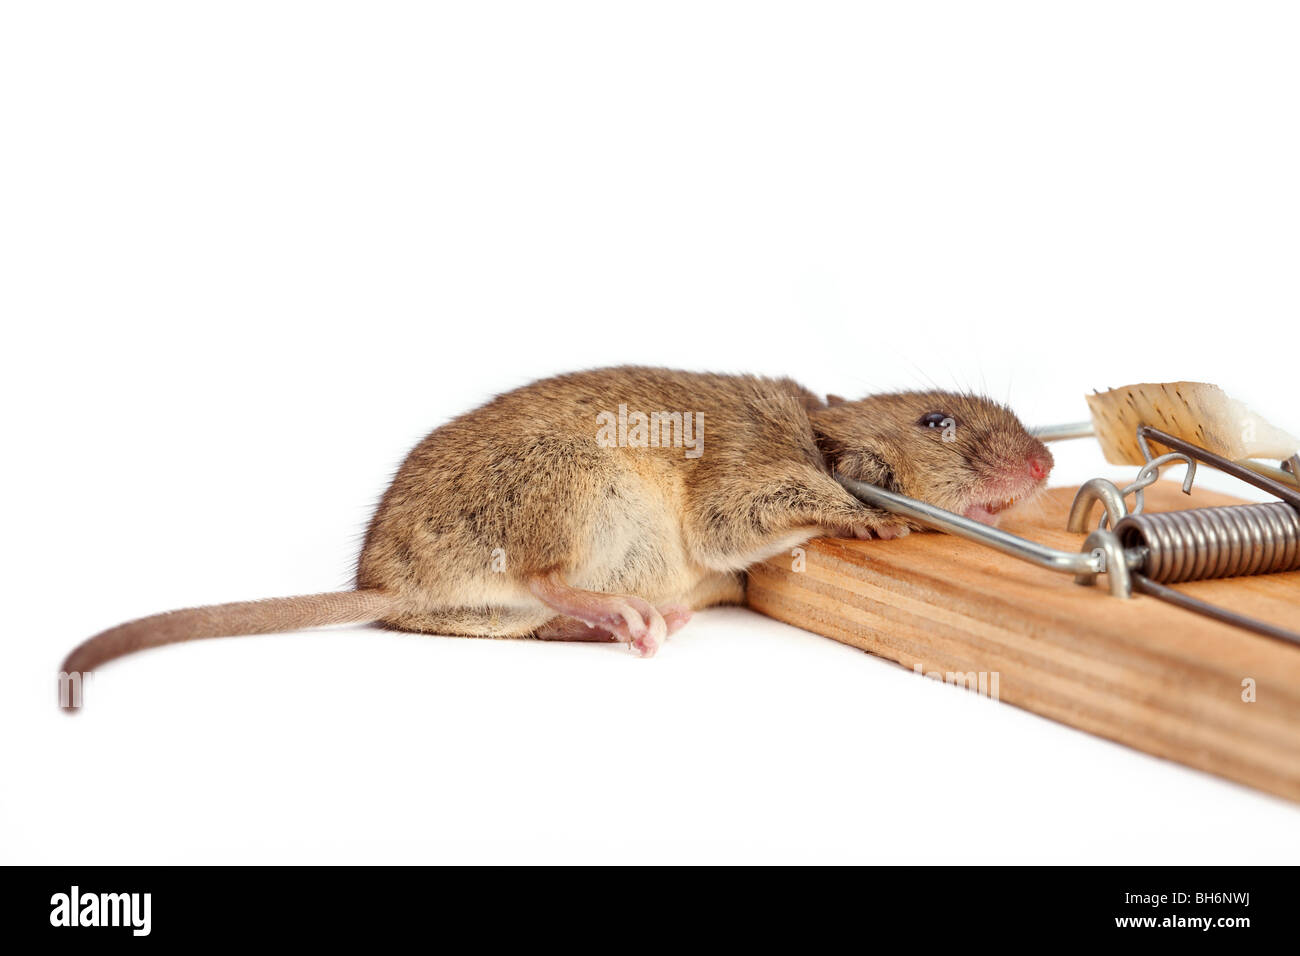 https://c8.alamy.com/comp/BH6NWJ/dead-mouse-in-a-mousetrap-on-a-white-background-BH6NWJ.jpg